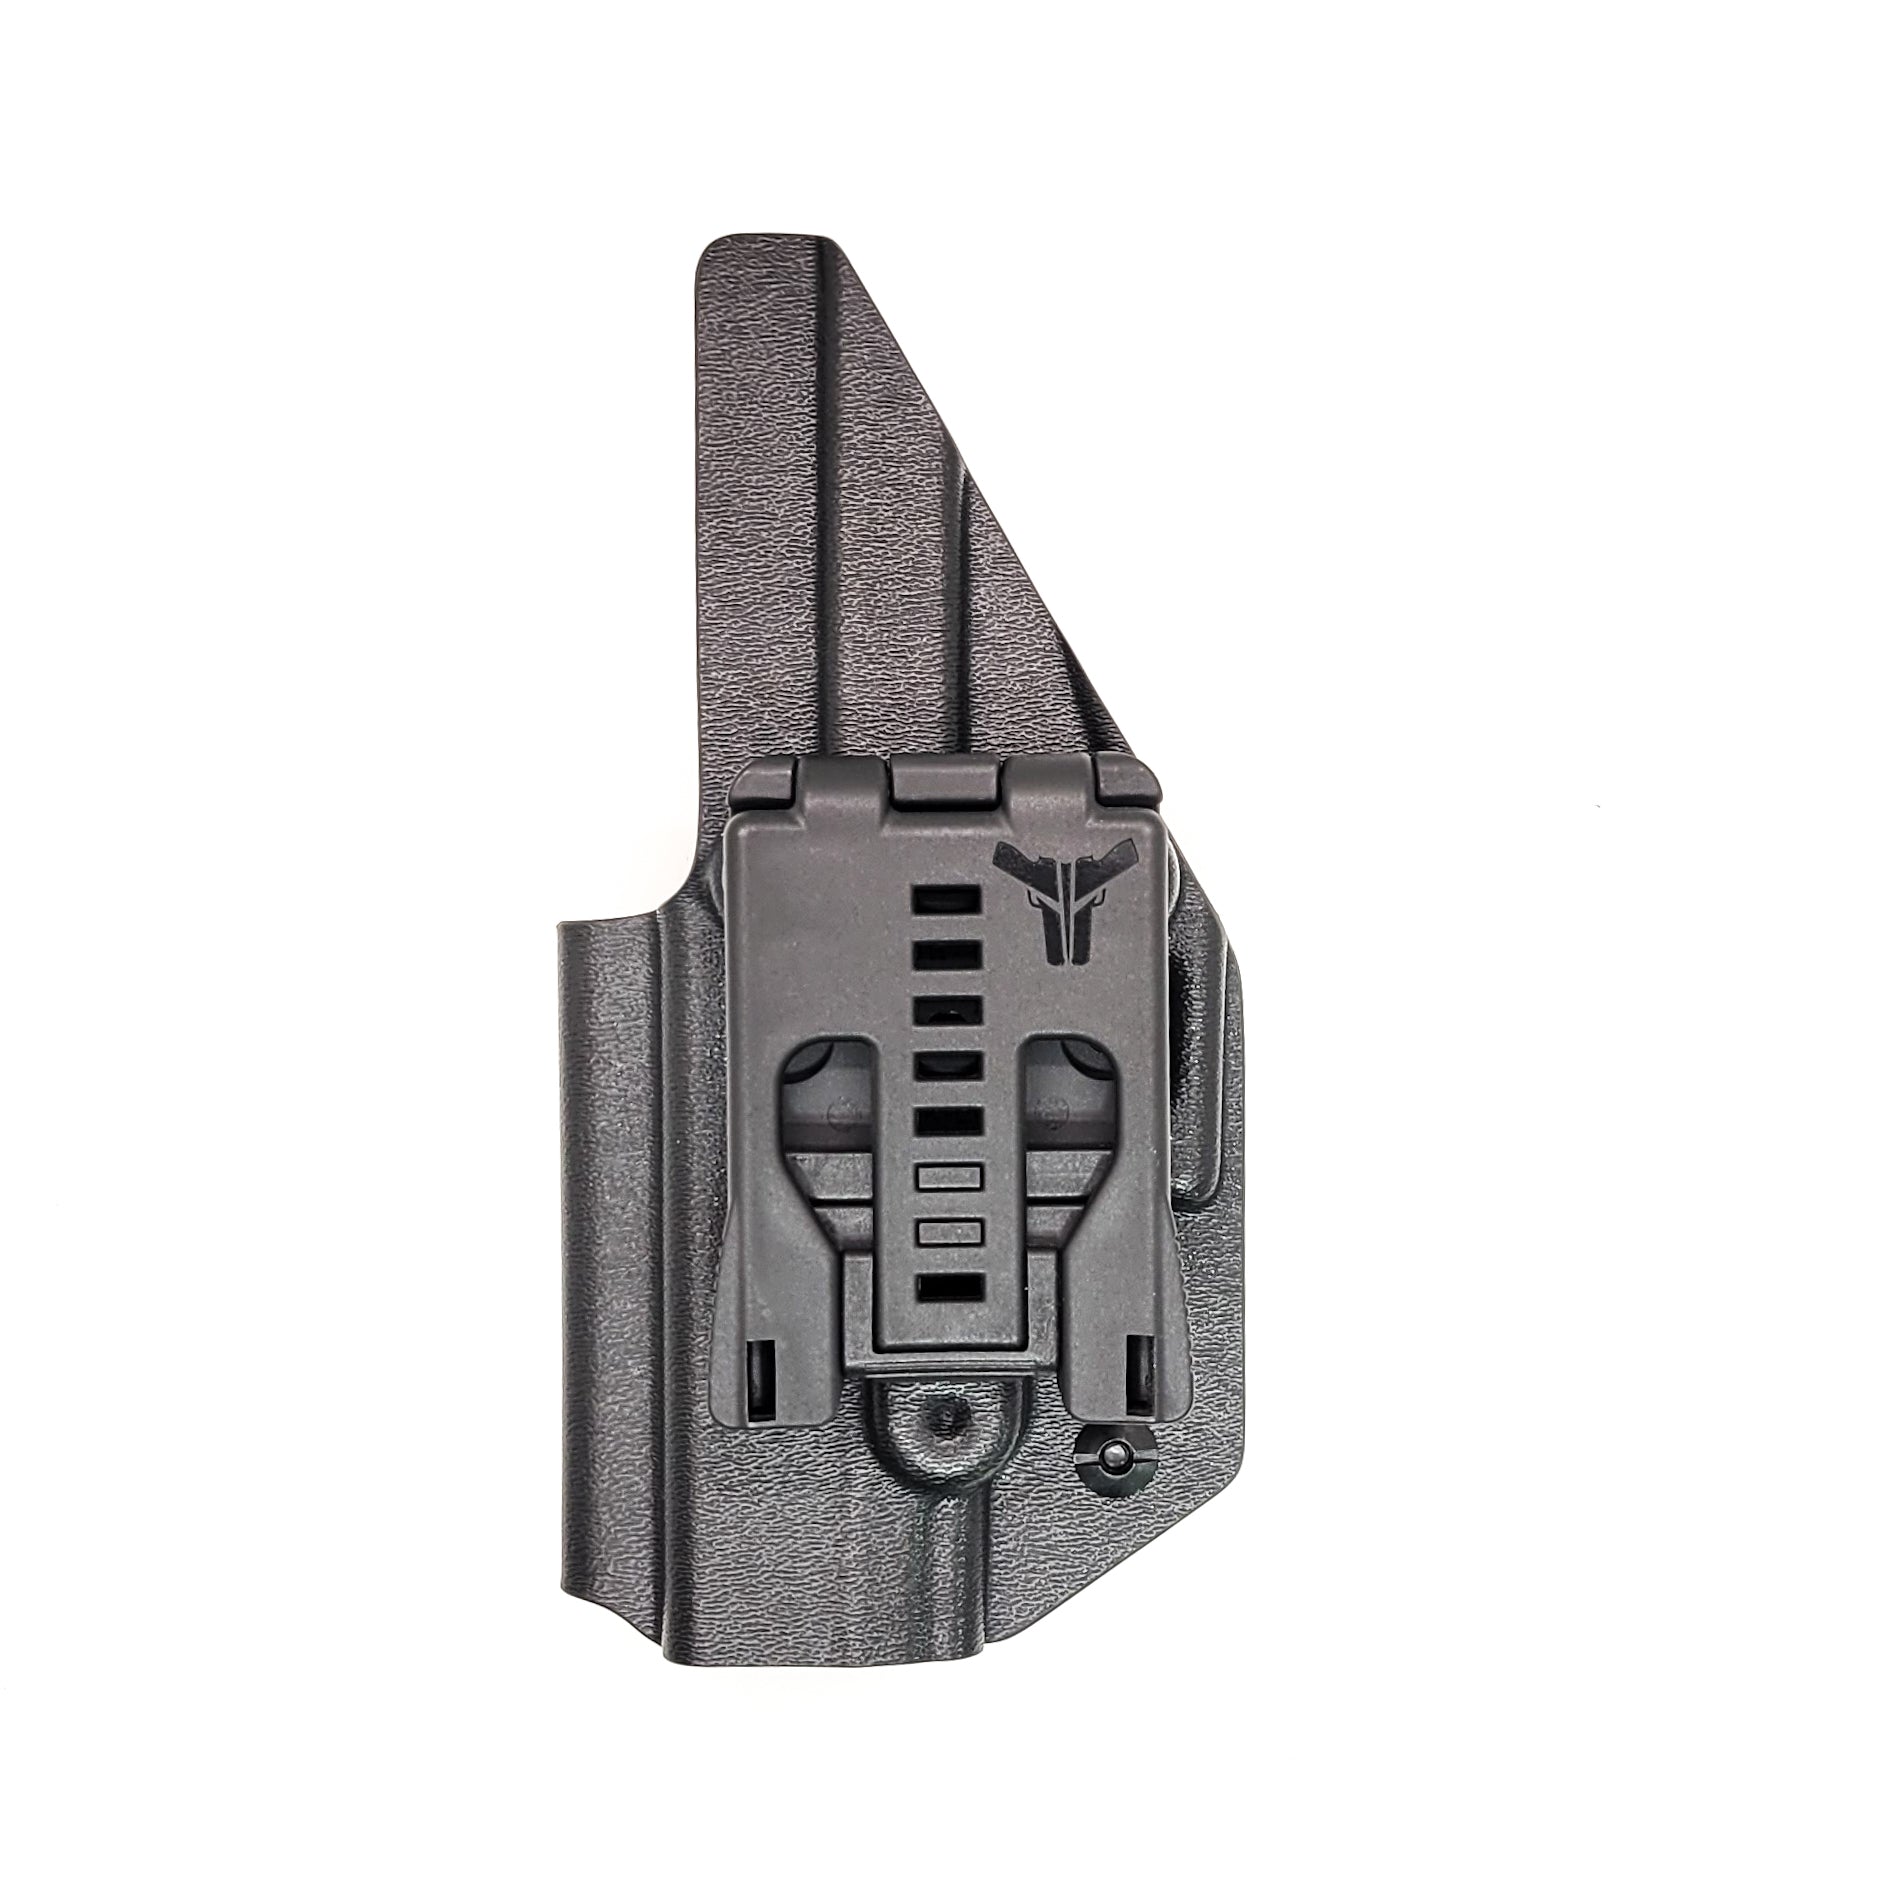 For the best, OWB, Outside Waistband Taco Style Holster of 2023 designed to fit the Glock 19 Gen 5 pistol. The holster will also fit the Gen 3, 4, and 5 Glock 19, 19X, 19 MOS, Gen 3 and 4 Glock 23, Glock 45, 45 MOS, Gen 5 9mm MOS models, and 32, 32 Gen 4. Open Muzzle, cleared for red dot sights. Made in the USA.